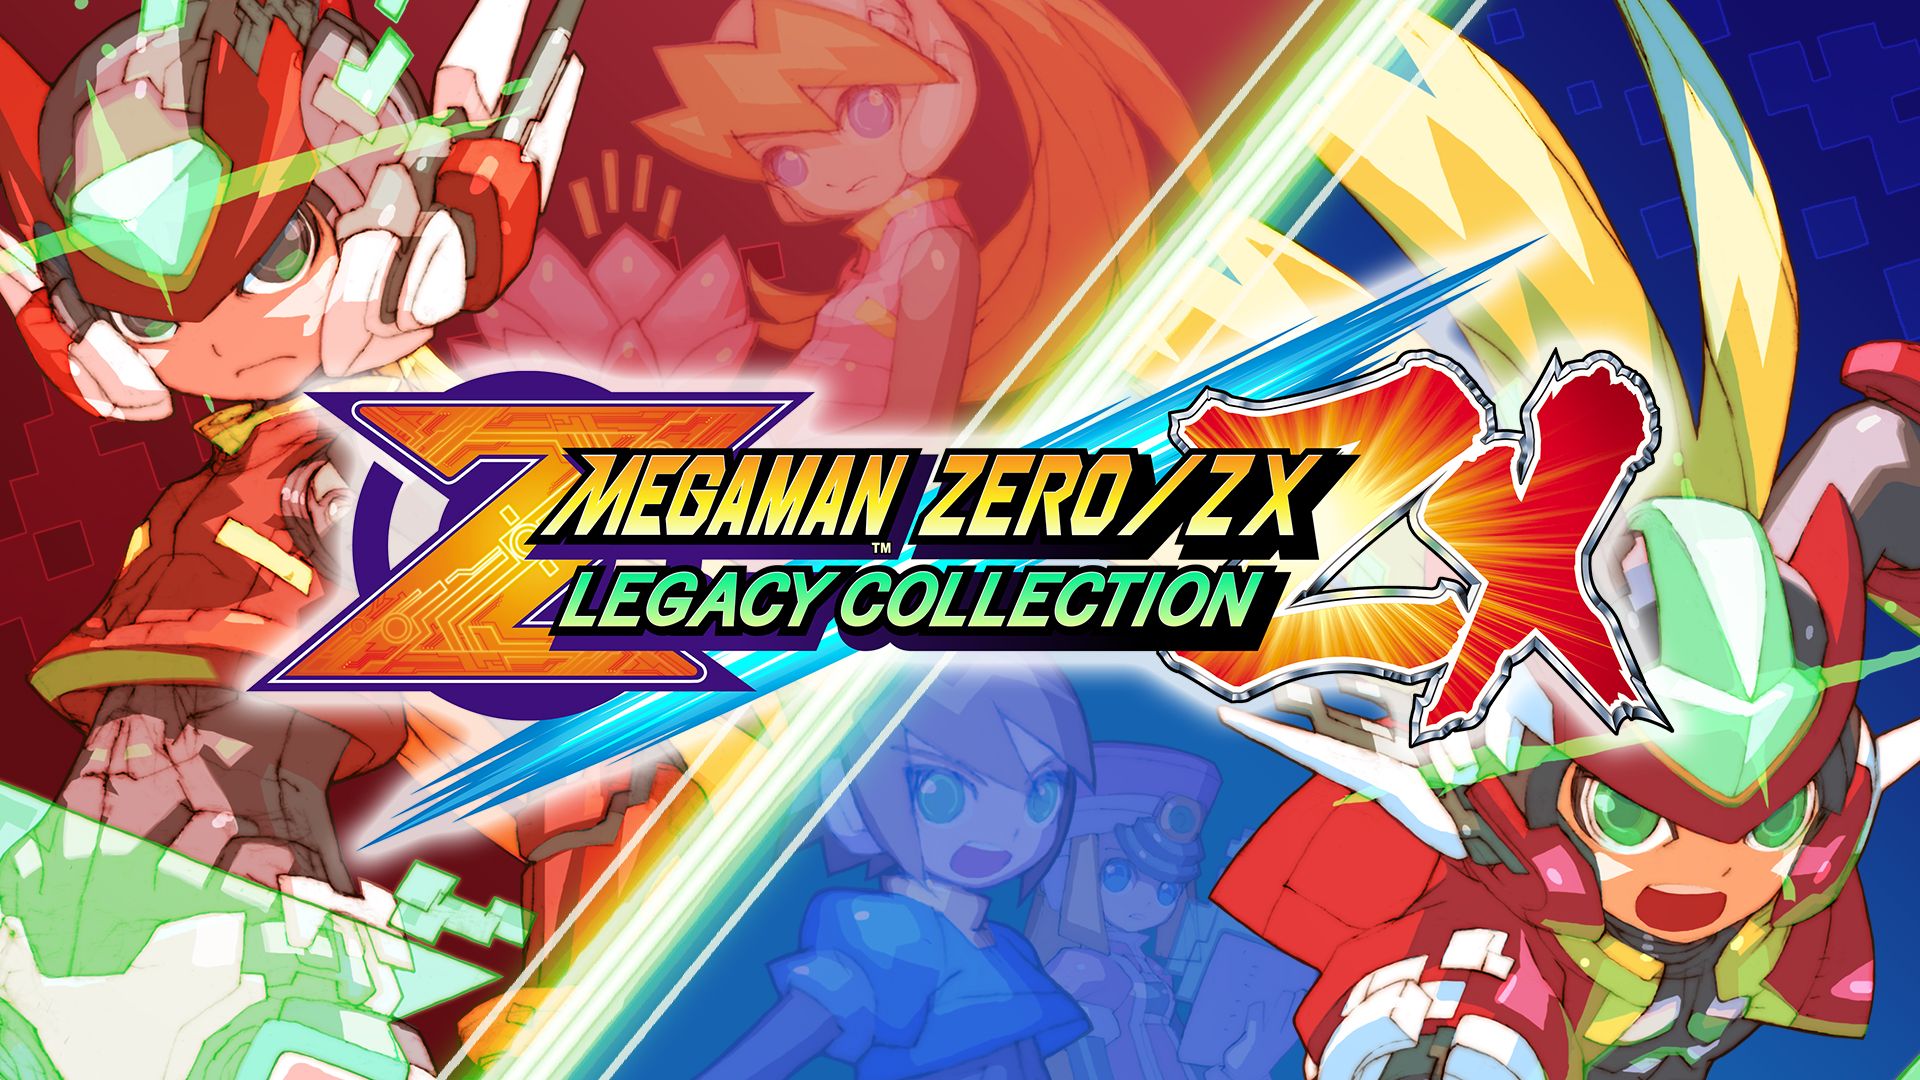 Mega Man Zero ZX Legacy Collection For Nintendo Switch Game Details